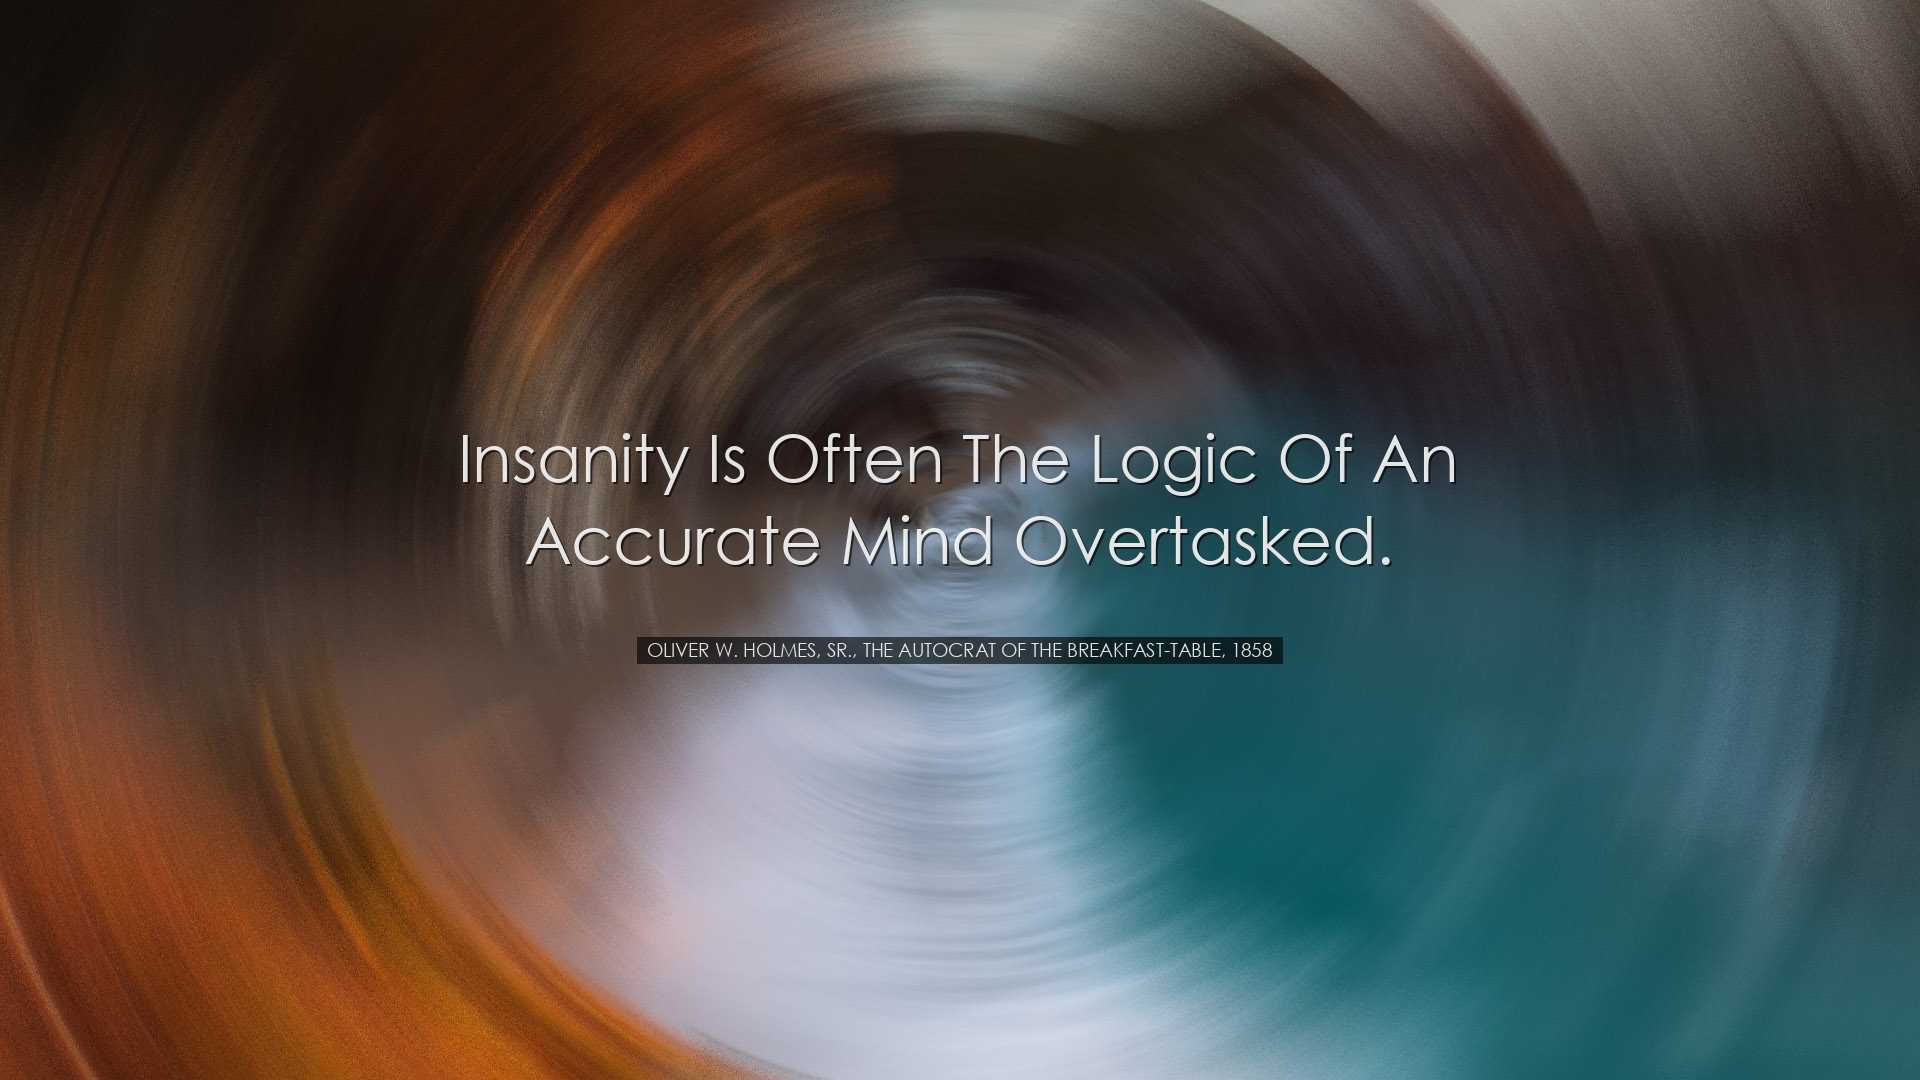 Insanity is often the logic of an accurate mind overtasked. - Oliv